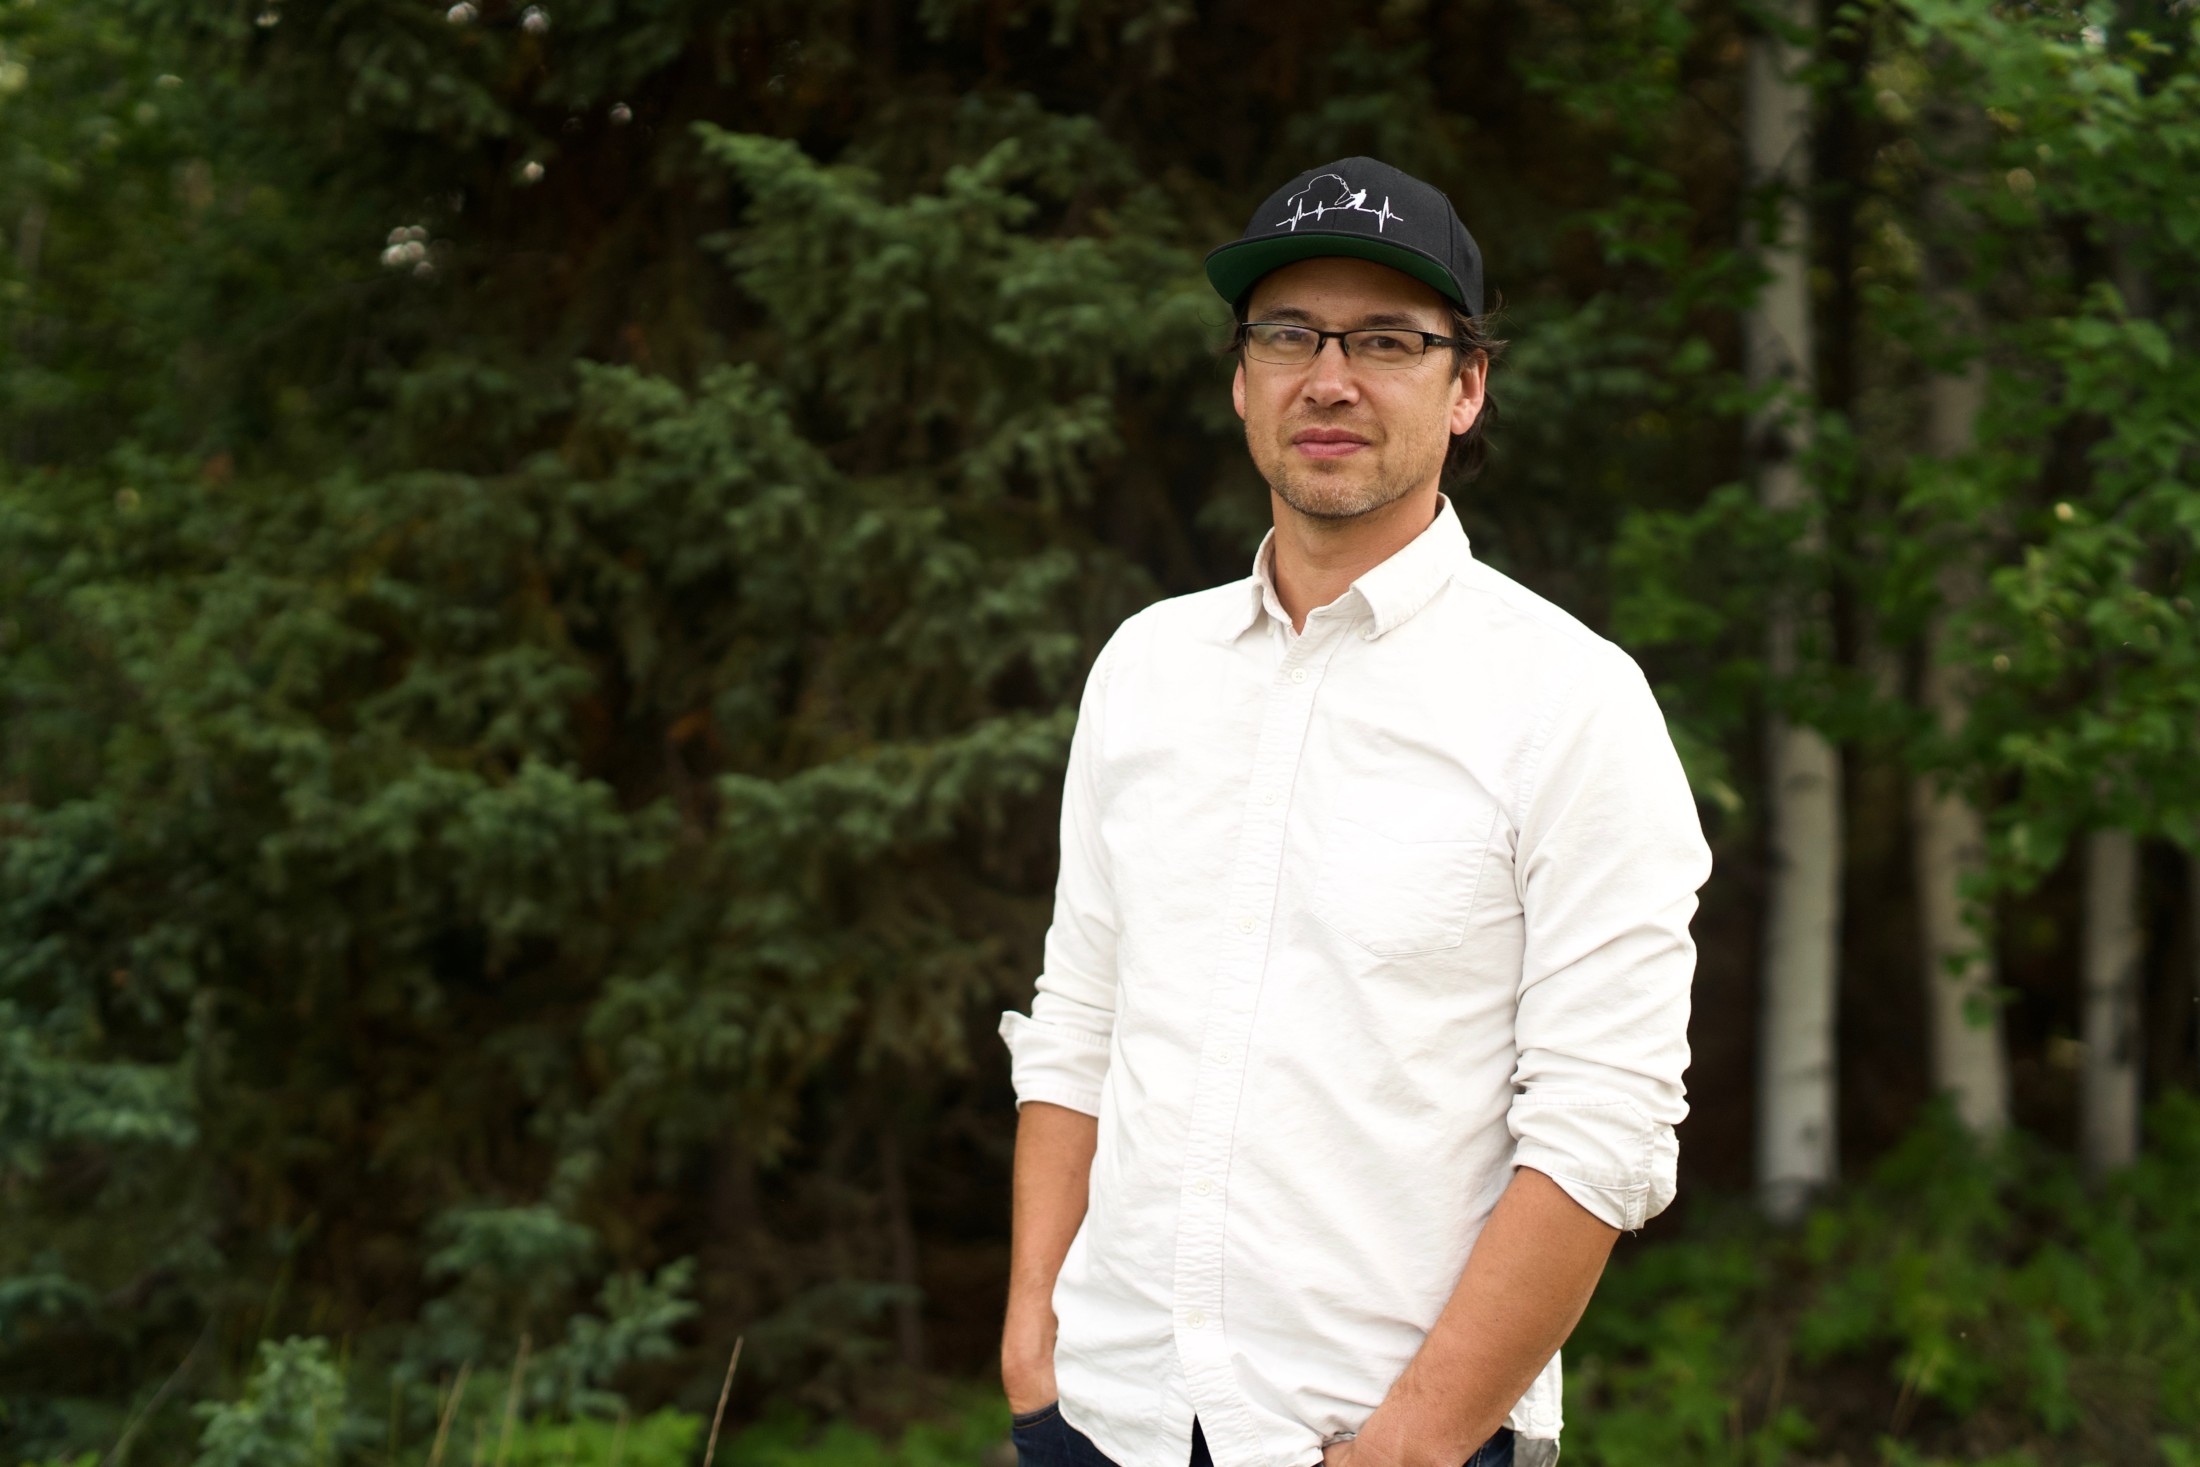 Steve Ellis, a negotiator for Lutsel K’e First Nation, in a white shirt and a baseball hat in front of green trees